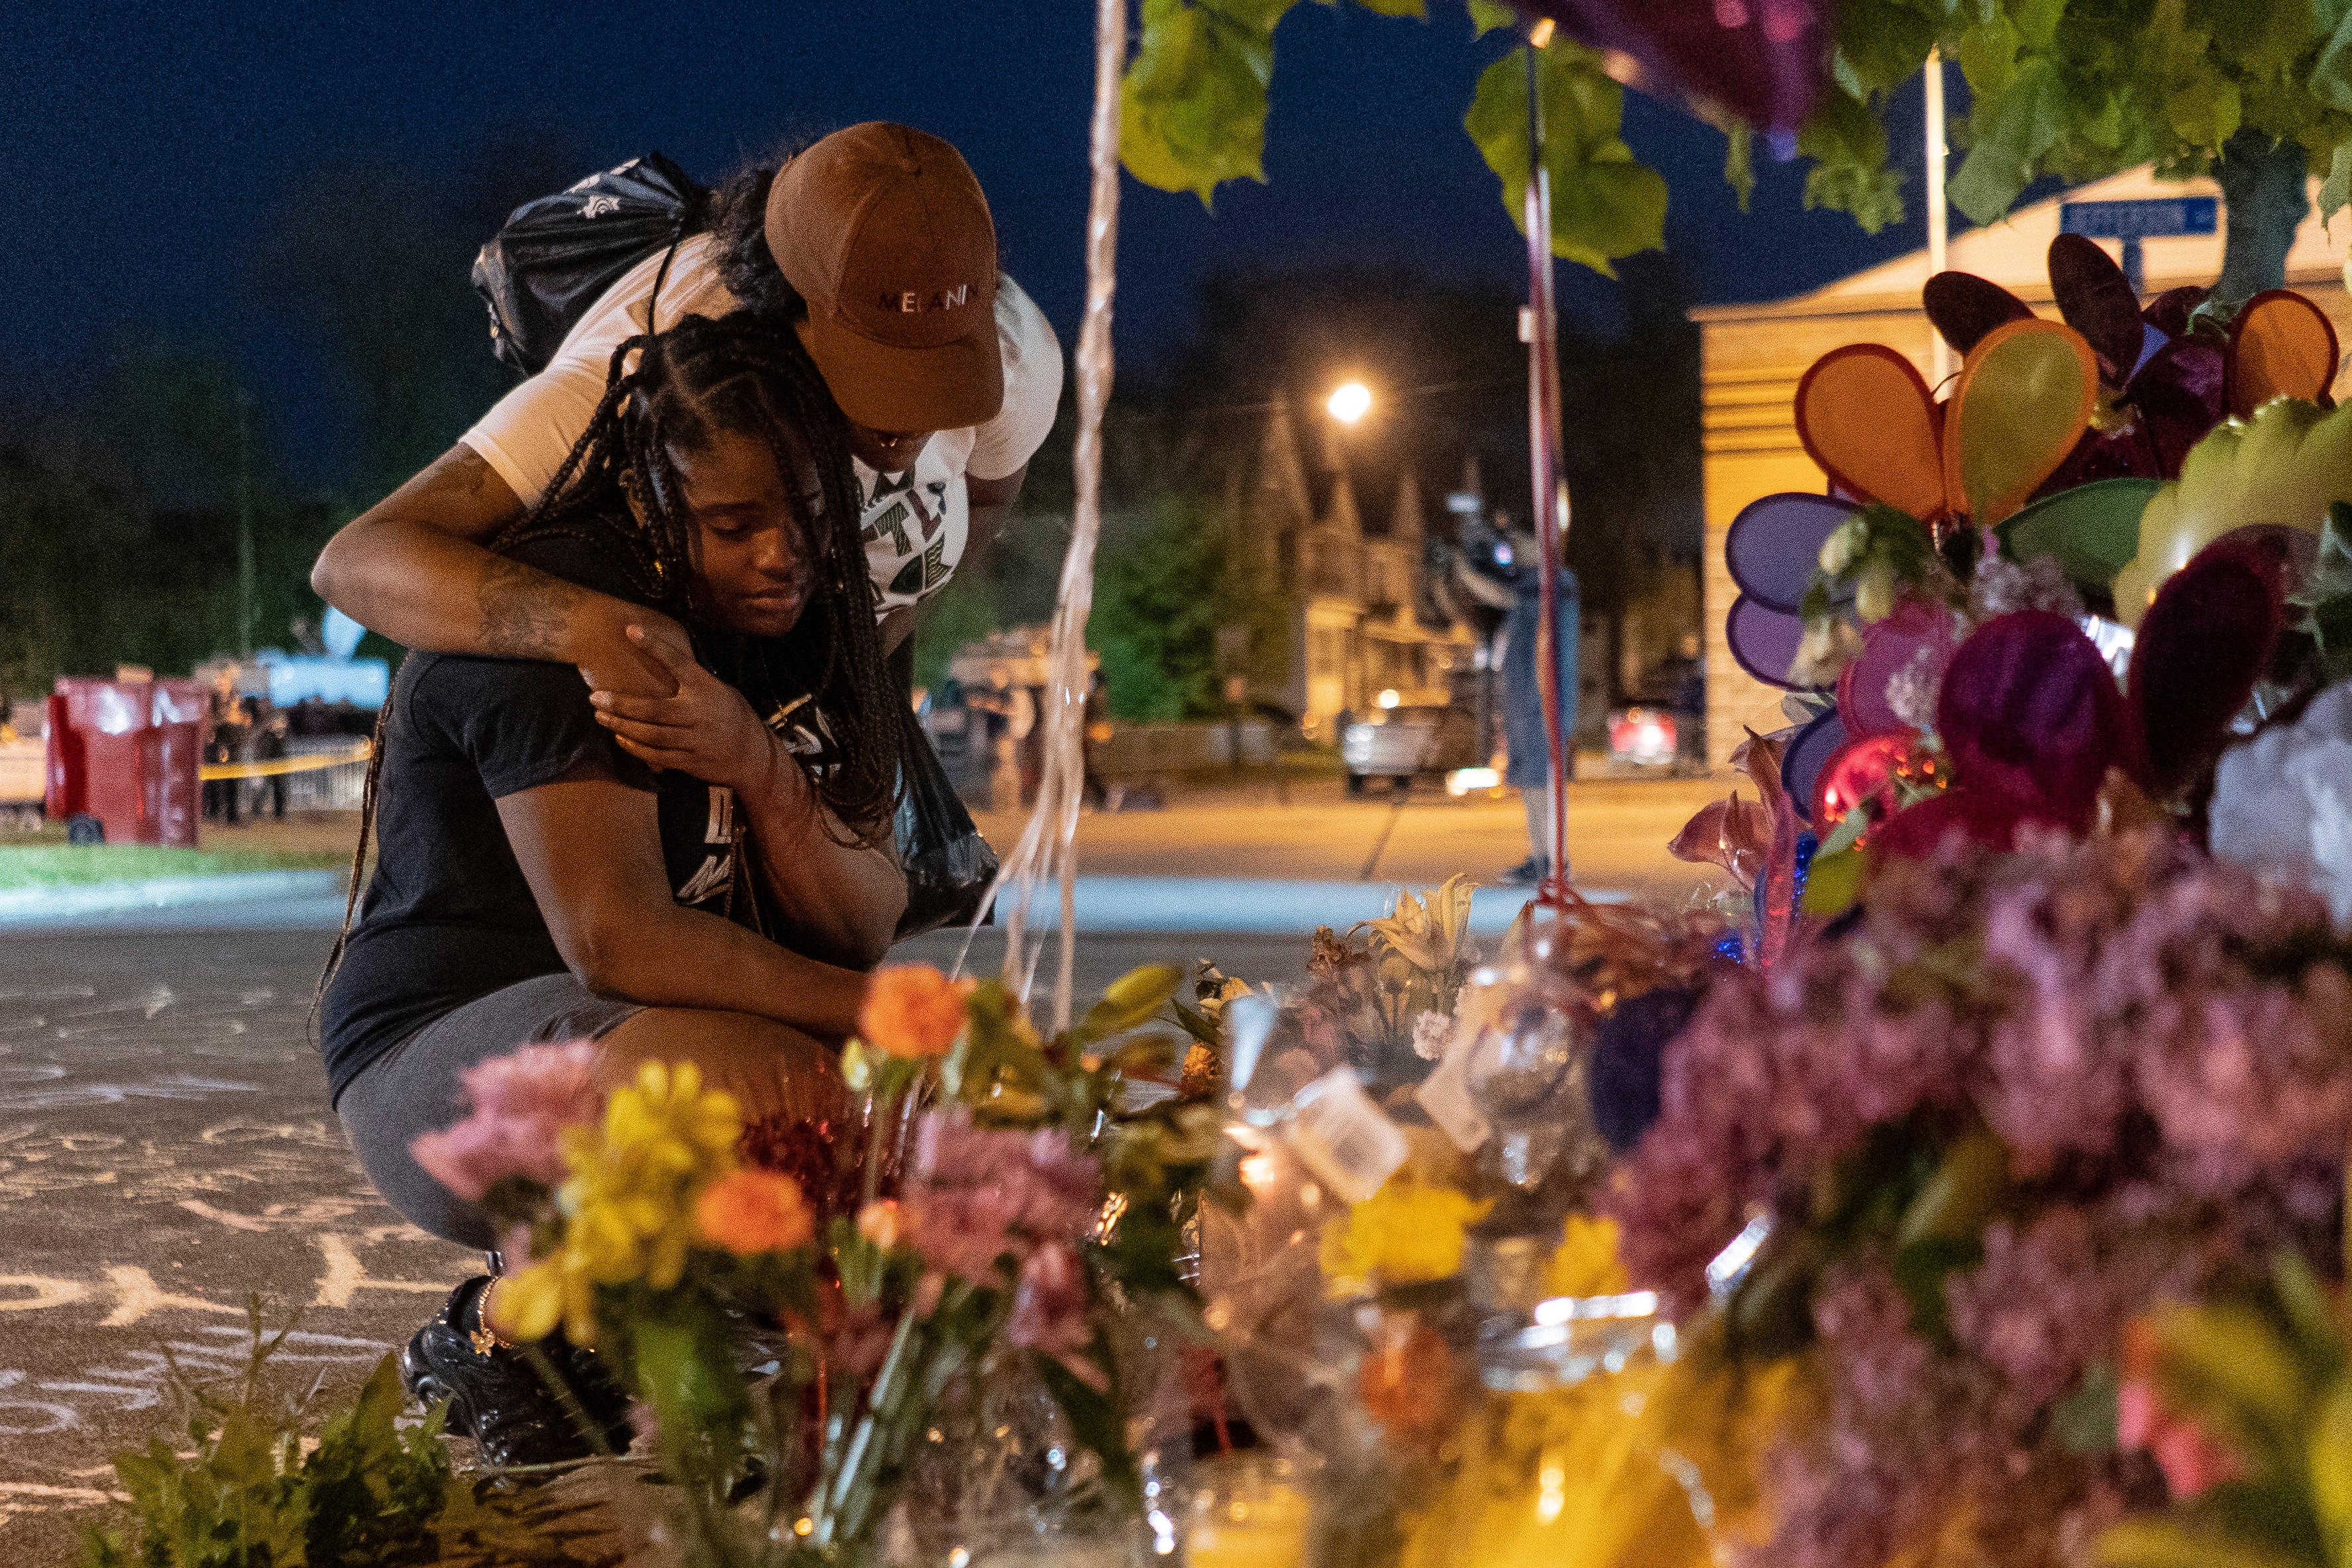 Pleazant Davis, 22, is comforted by her friend, Tasha Dixon, 35, at a memorial honouring the victims of the Tops shooting across the street from the store in Buffalo on 15 May